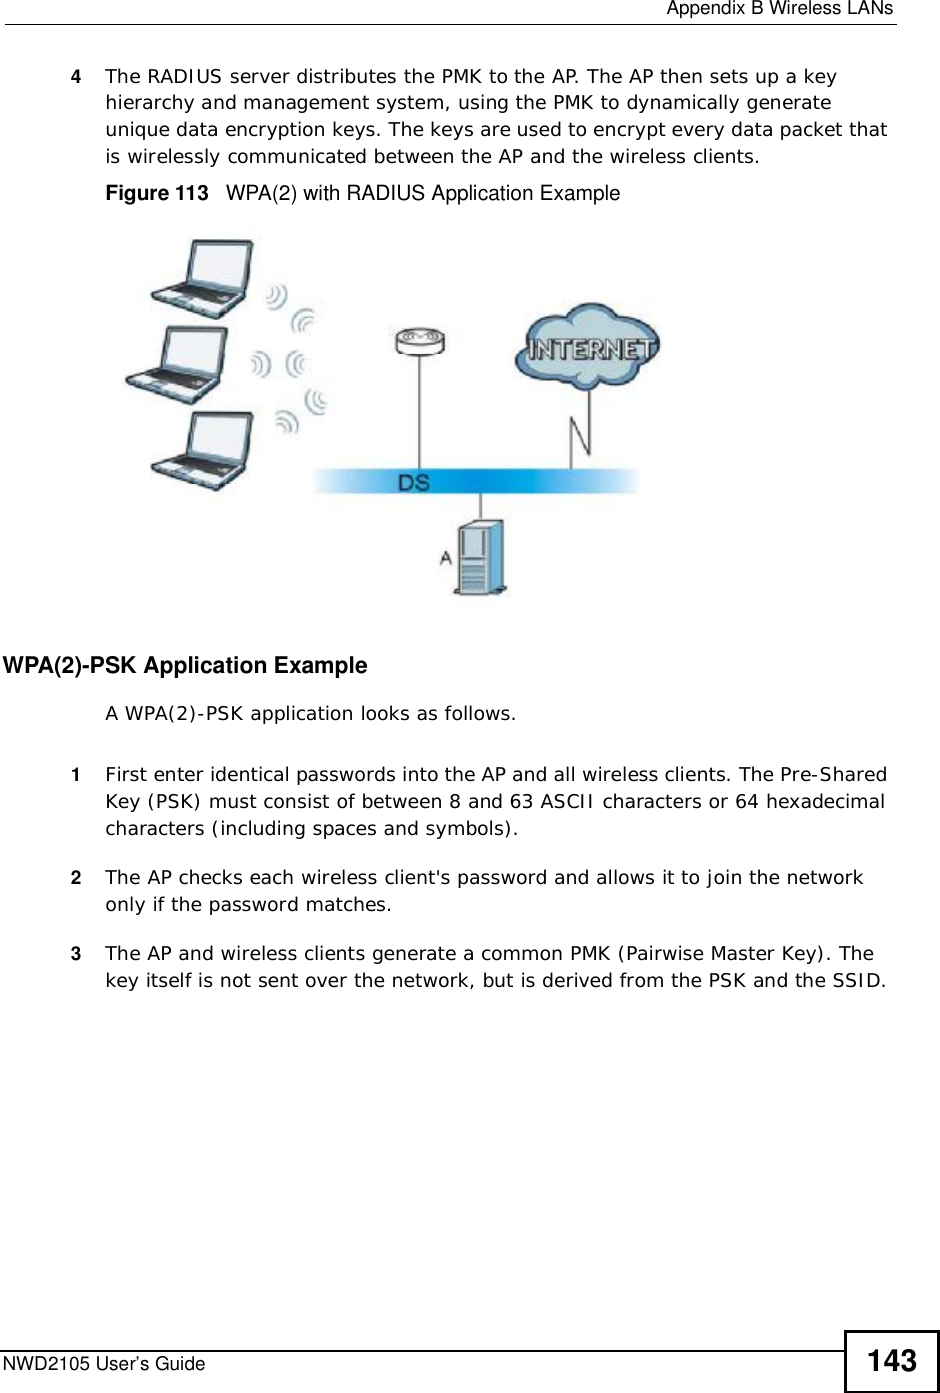  Appendix BWireless LANsNWD2105 User’s Guide 1434The RADIUS server distributes the PMK to the AP. The AP then sets up a key hierarchy and management system, using the PMK to dynamically generate unique data encryption keys. The keys are used to encrypt every data packet that is wirelessly communicated between the AP and the wireless clients.Figure 113   WPA(2) with RADIUS Application ExampleWPA(2)-PSK Application ExampleA WPA(2)-PSK application looks as follows.1First enter identical passwords into the AP and all wireless clients. The Pre-Shared Key (PSK) must consist of between 8 and 63 ASCII characters or 64 hexadecimal characters (including spaces and symbols).2The AP checks each wireless client&apos;s password and allows it to join the network only if the password matches.3The AP and wireless clients generate a common PMK (Pairwise Master Key). The key itself is not sent over the network, but is derived from the PSK and the SSID. 